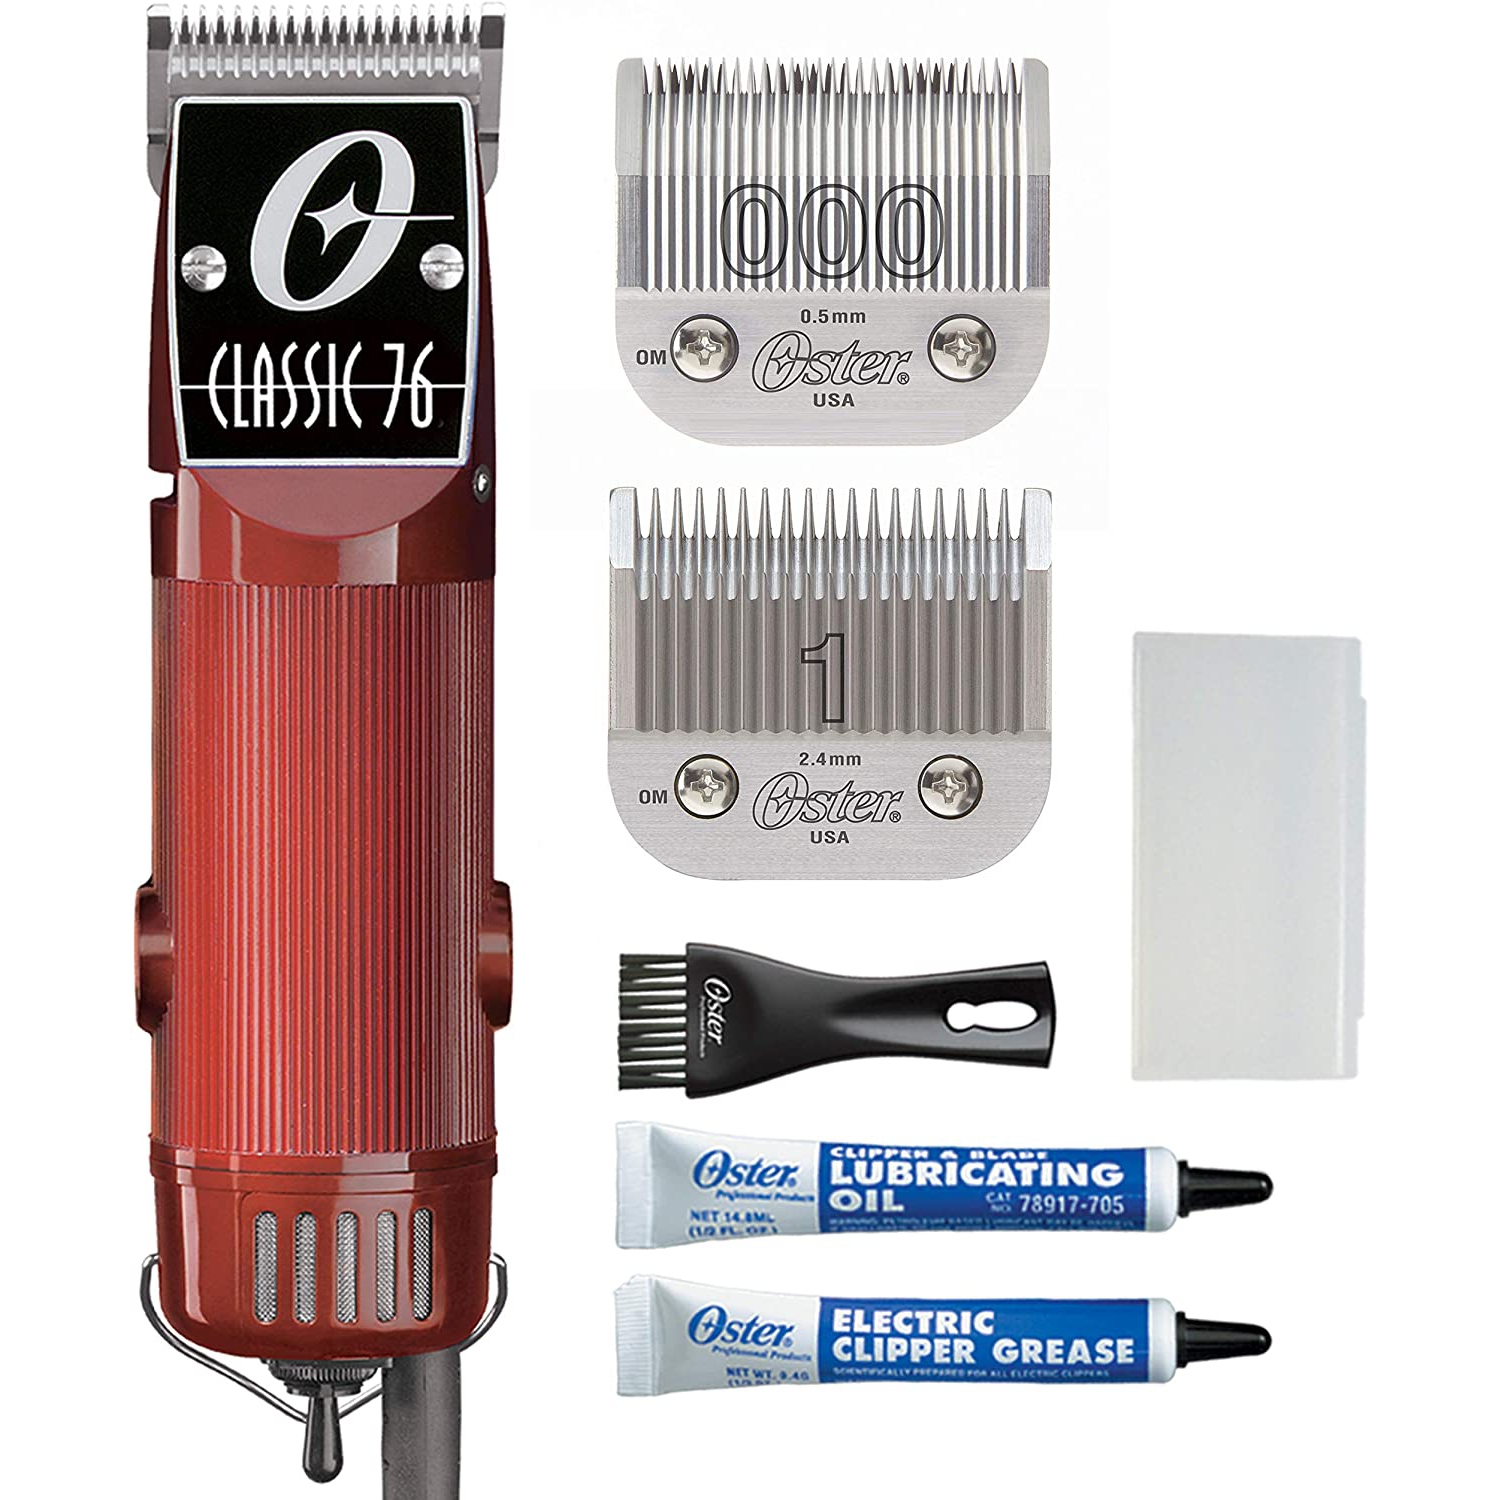 Oster Professional Classic 76 Universal Motor Hair Clipper #76076-010